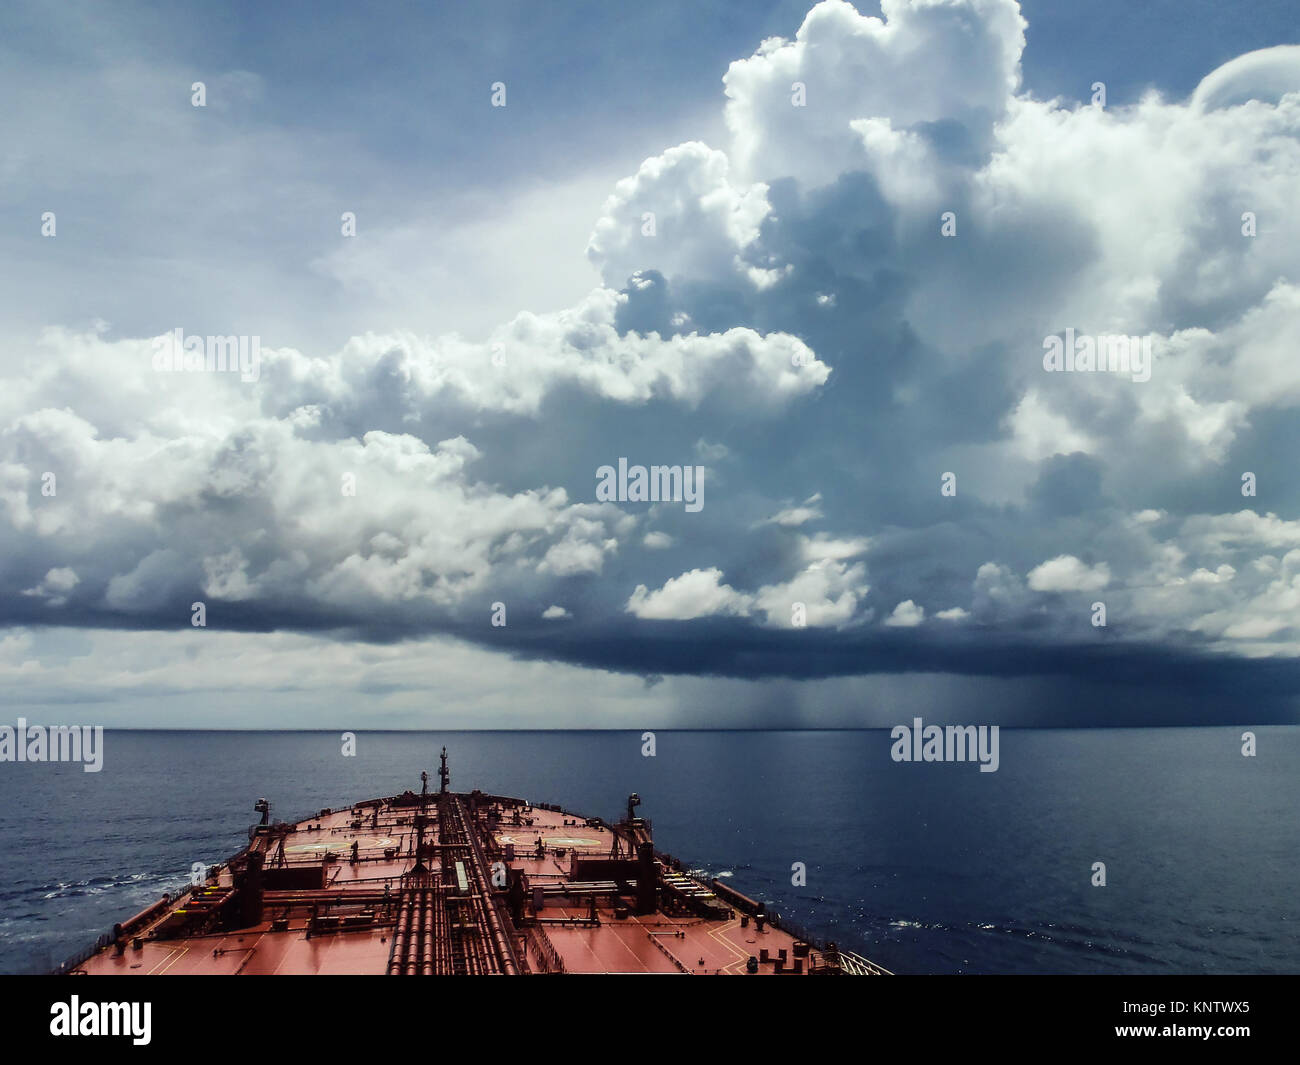 An oil tanker sails in the waters of Indian ocean facing a terrible storm Stock Photo